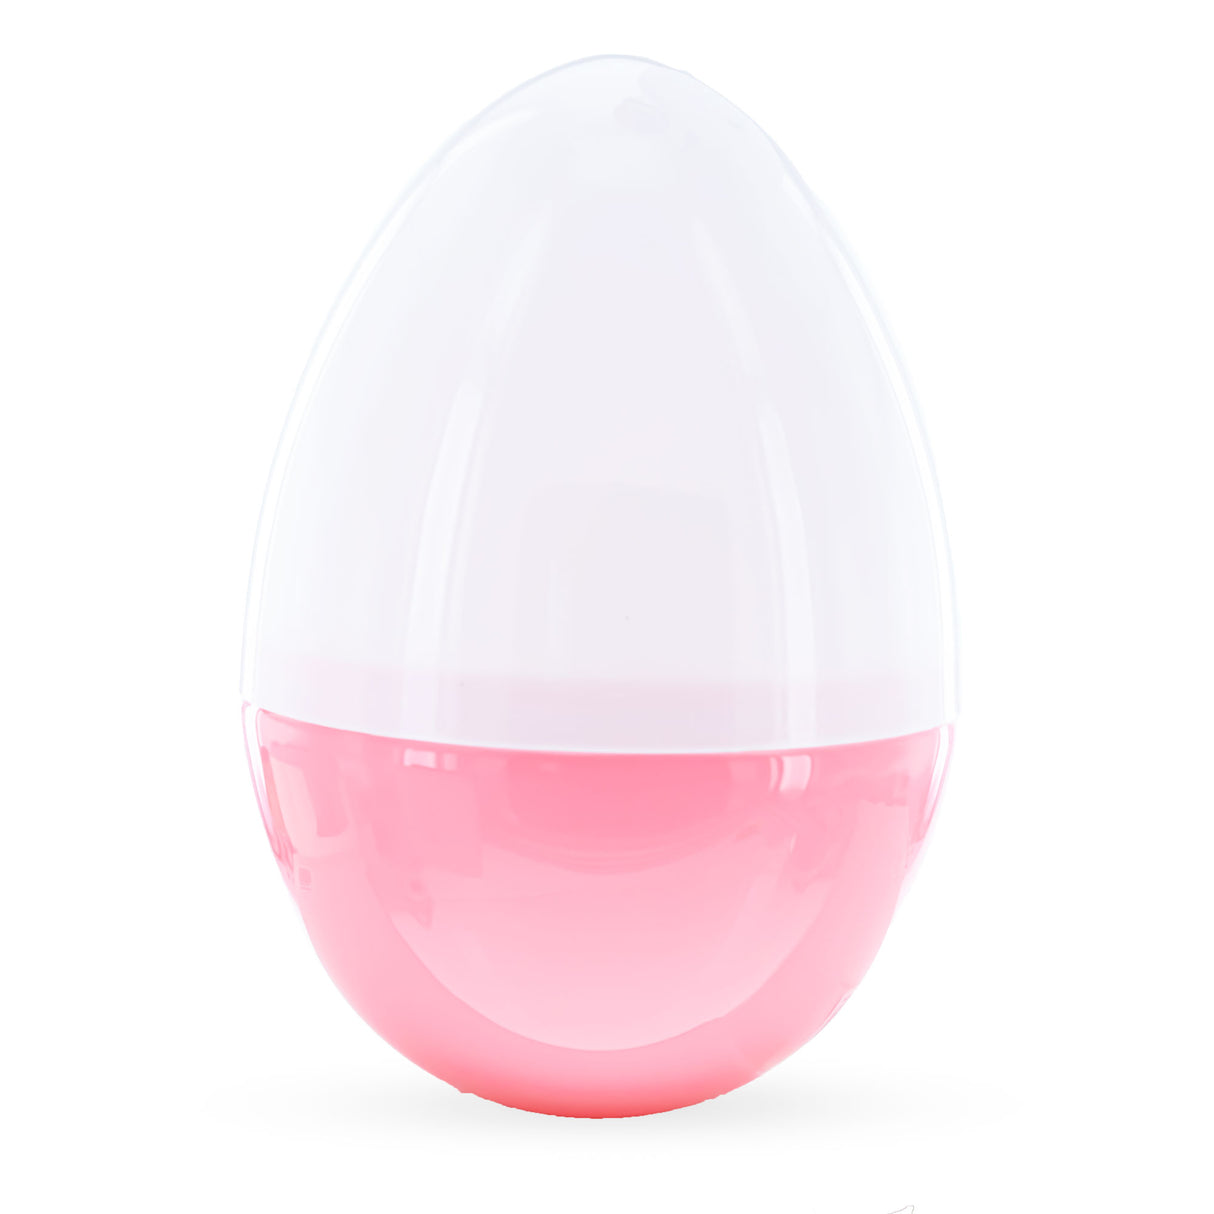 Large Bunny Giant Jumbo Size White and Pink Plastic Easter Egg 10 Inches ,dimensions in inches: 10 x  x 7